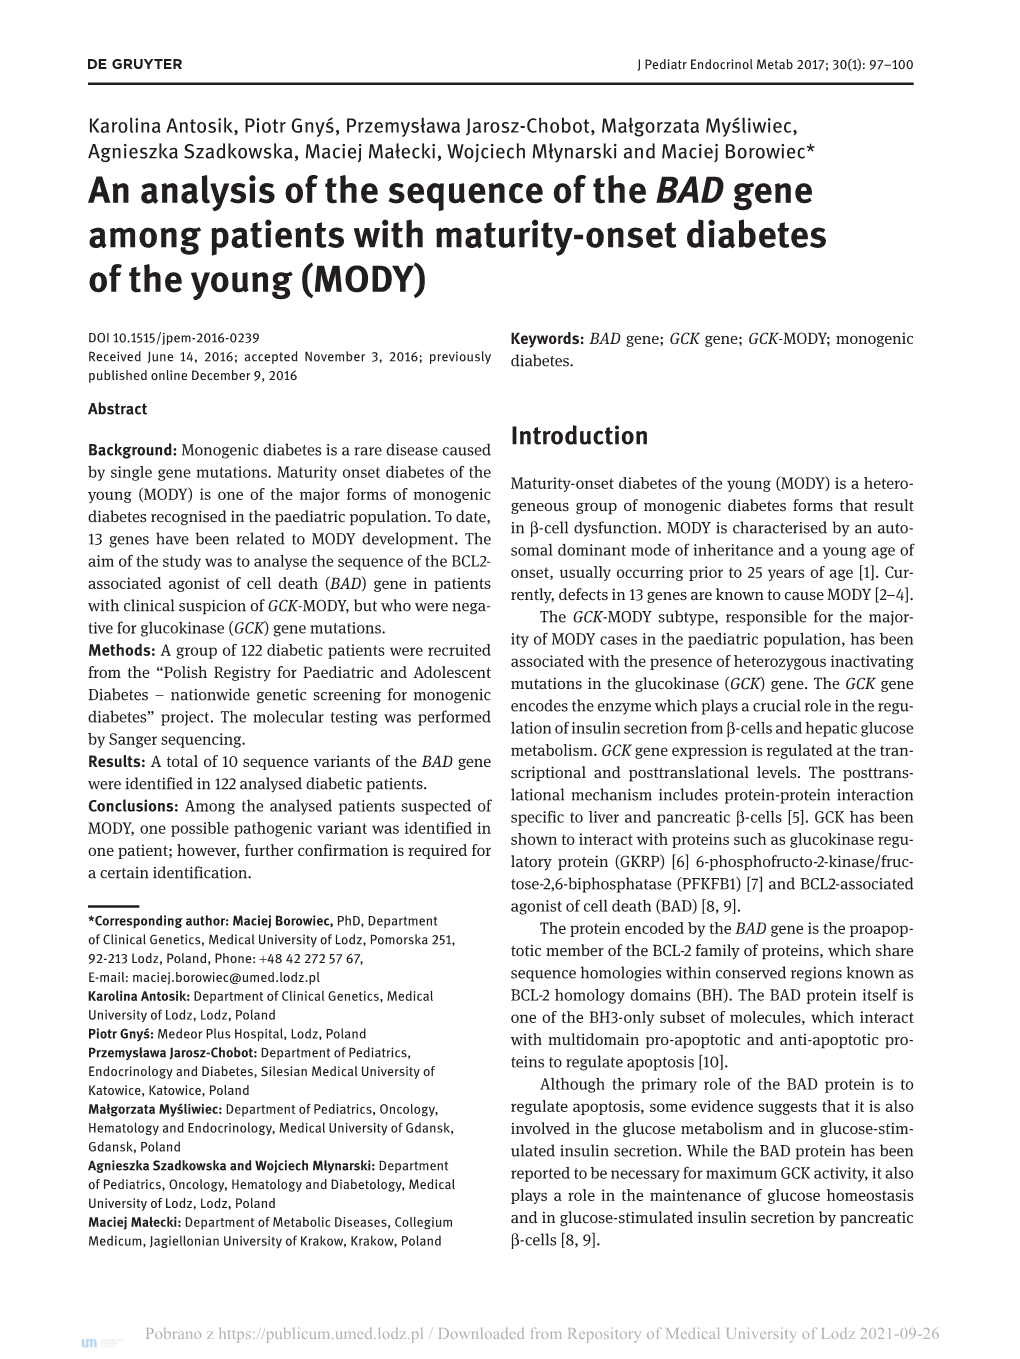 An Analysis of the Sequence of the BAD Gene Among Patients with Maturity-Onset Diabetes of the Young (MODY)